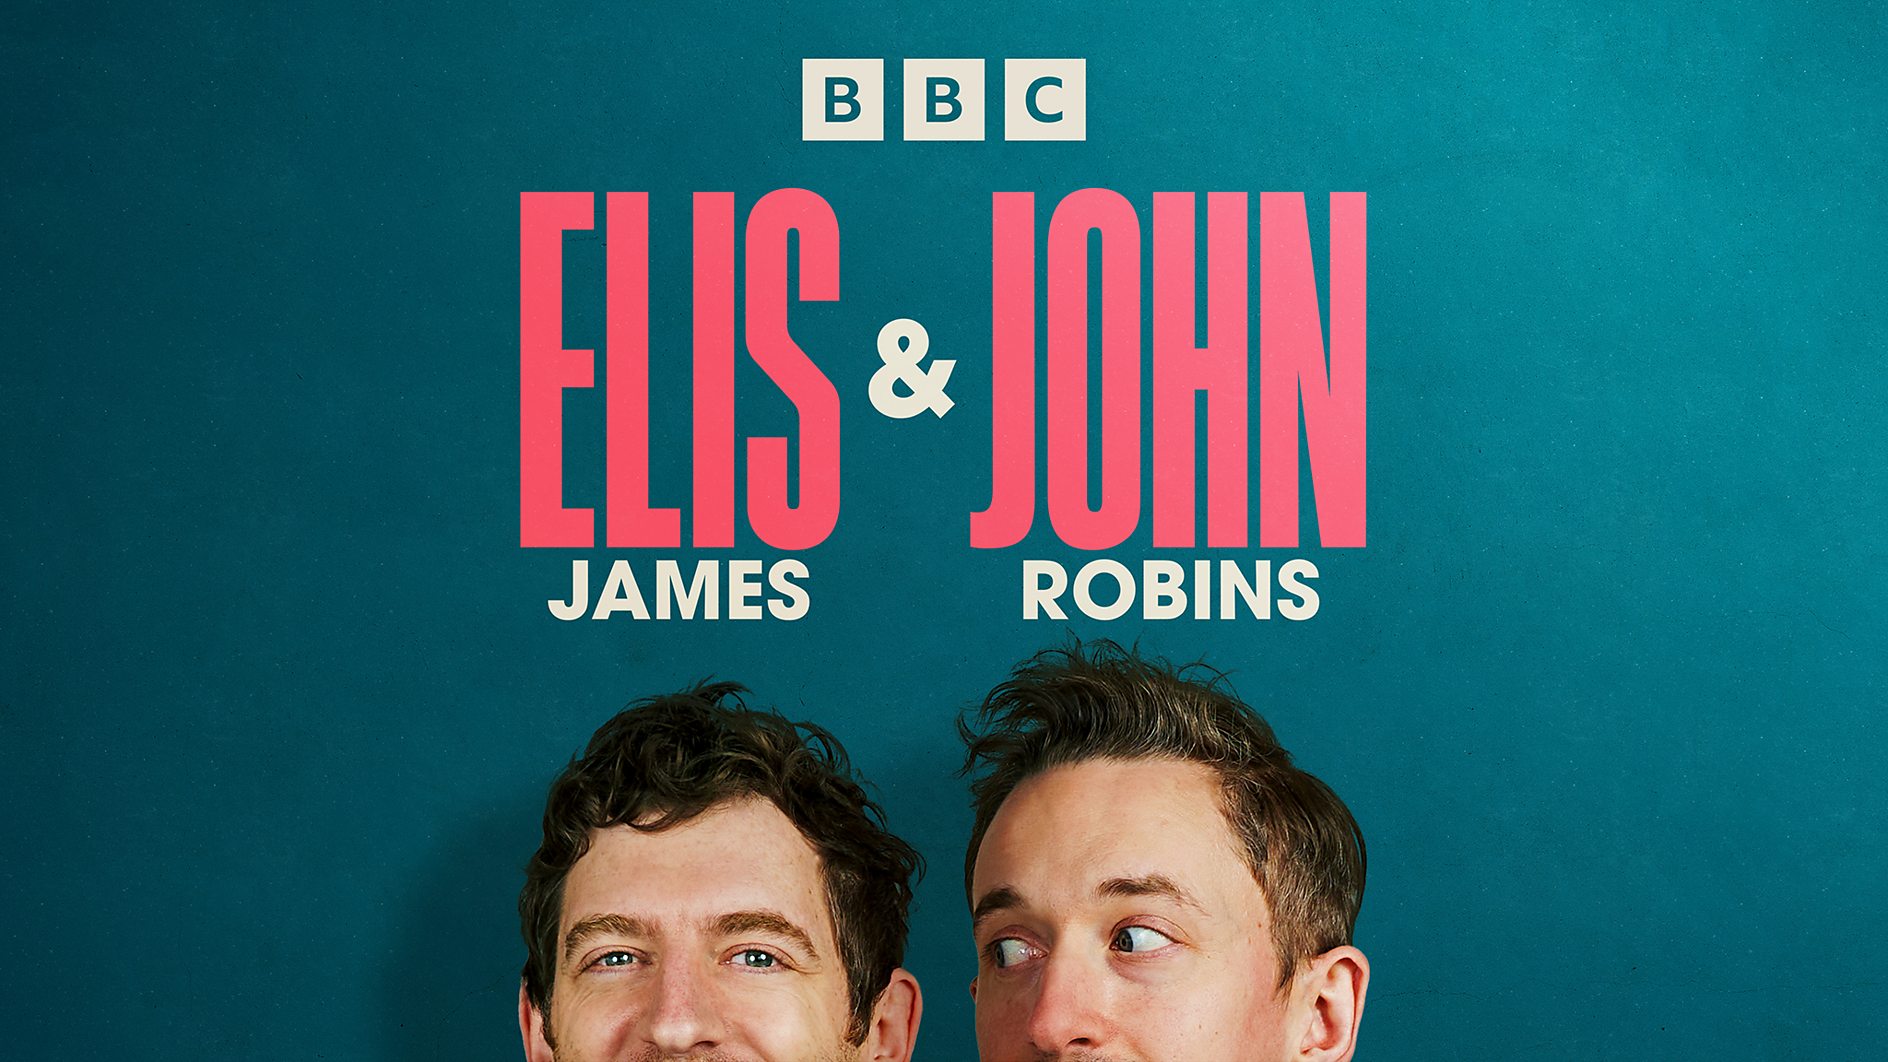 BBC Radio 5 Live's Elis James & John Robins double up for new-look BBC Sounds podcast - February 6